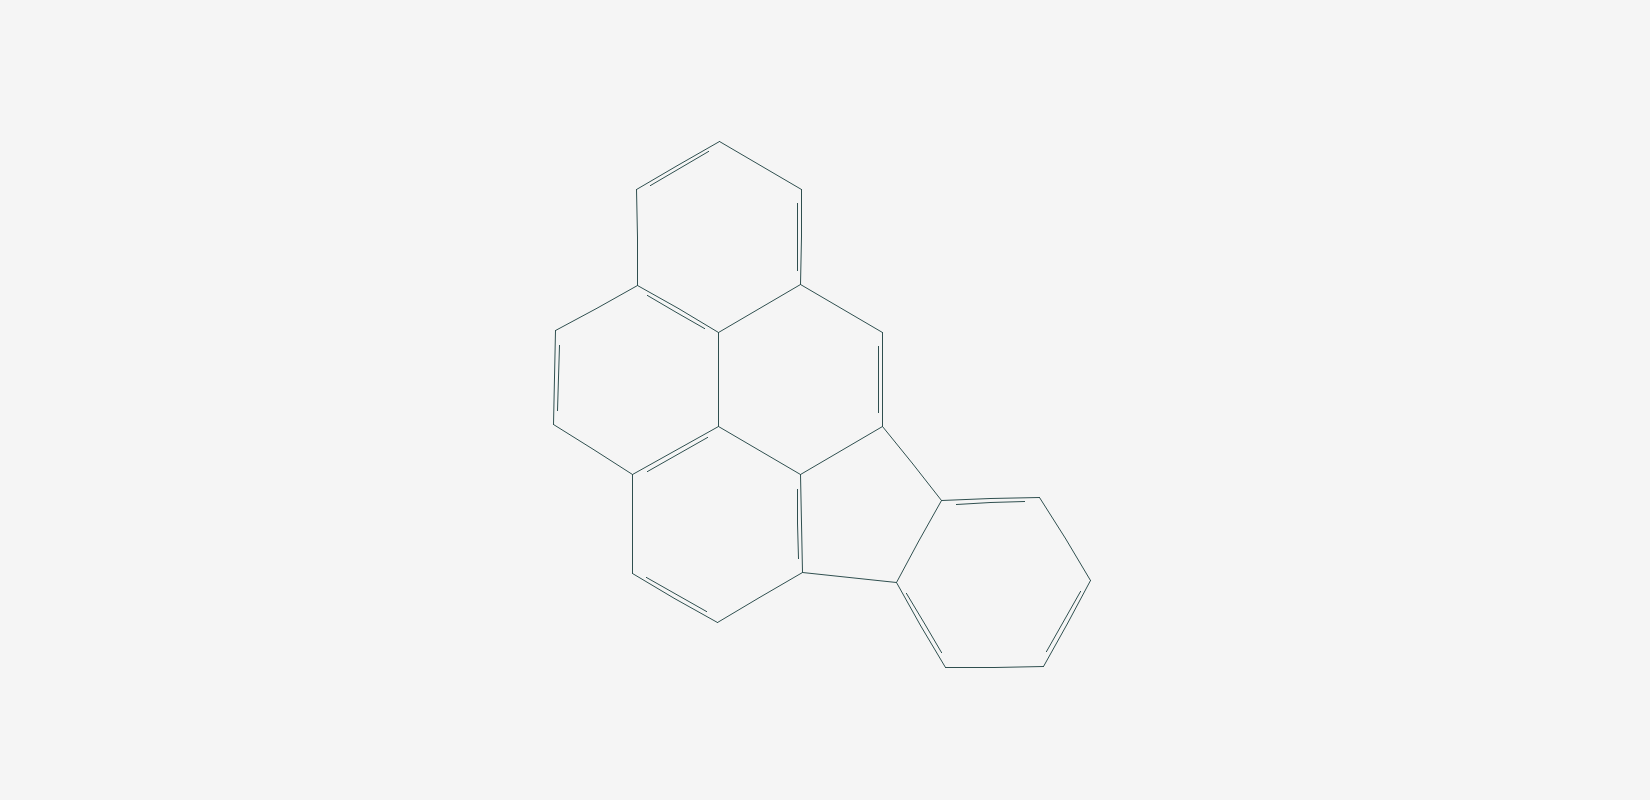 Structure of indeno[1,2,3-c,d]pyrene